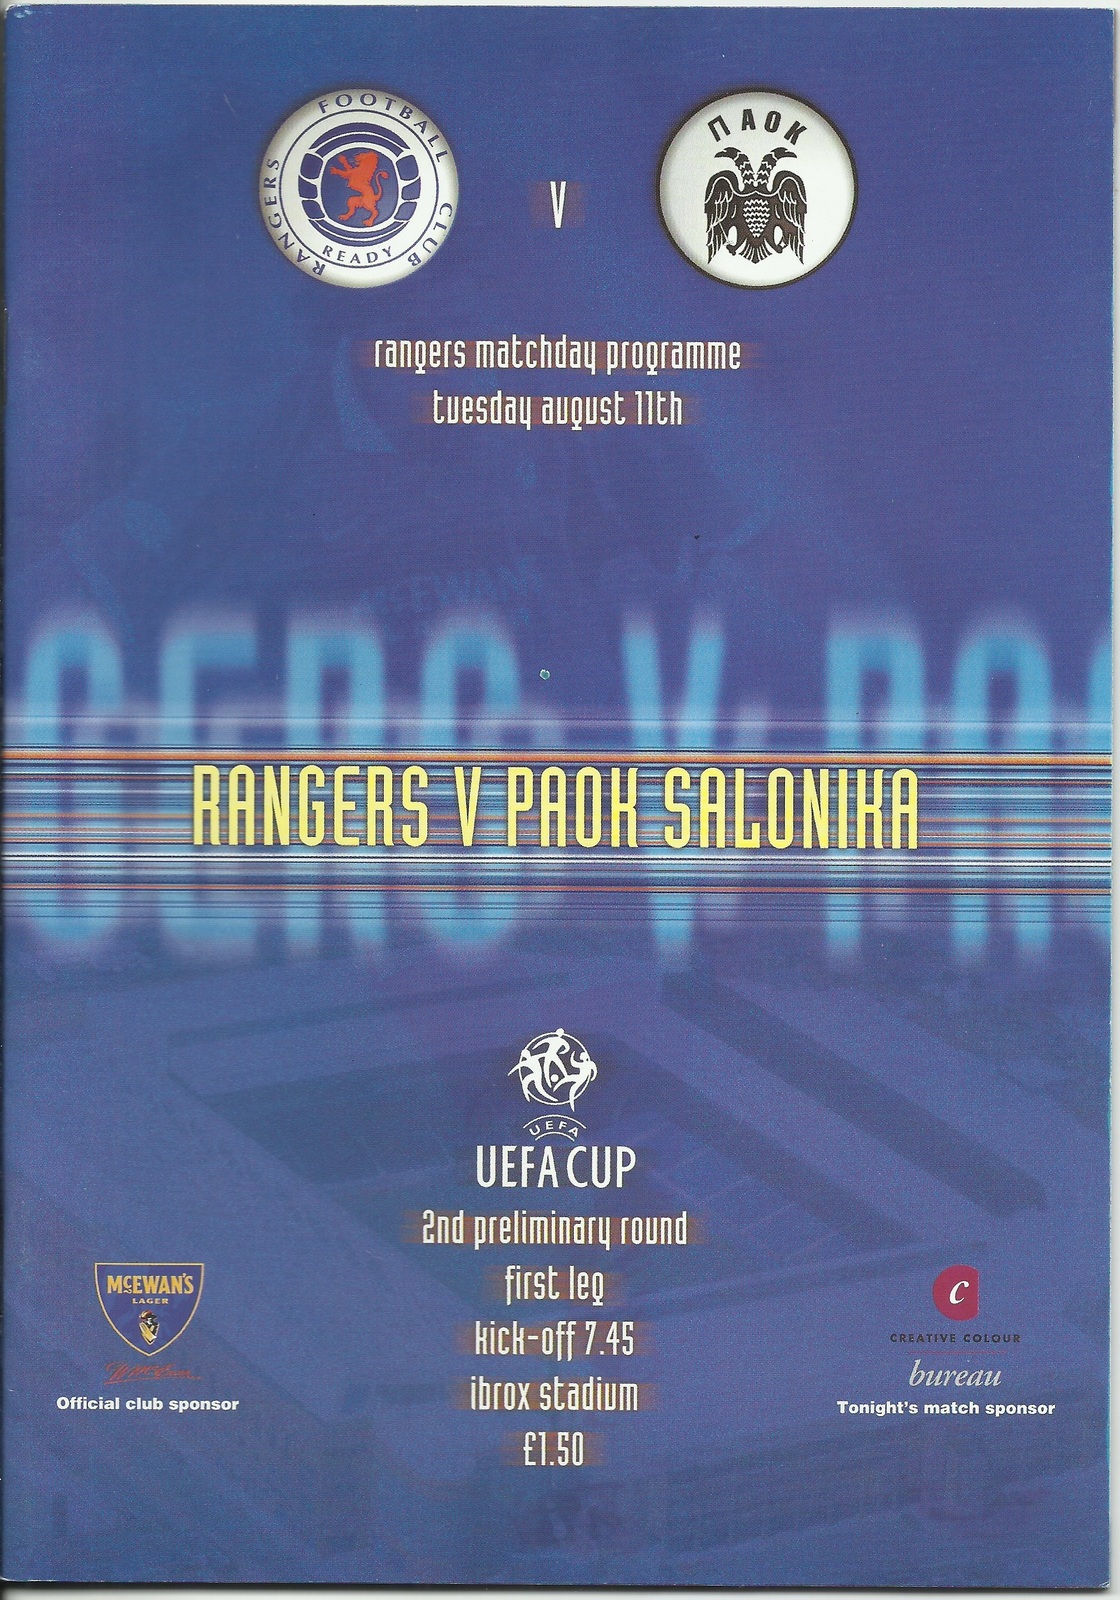 Primary image for RANGERS – PAOK THESSALONIKI 1998-1999 UEFA CUP - MATCH PROGRAM FOOTBALL SOCCER 